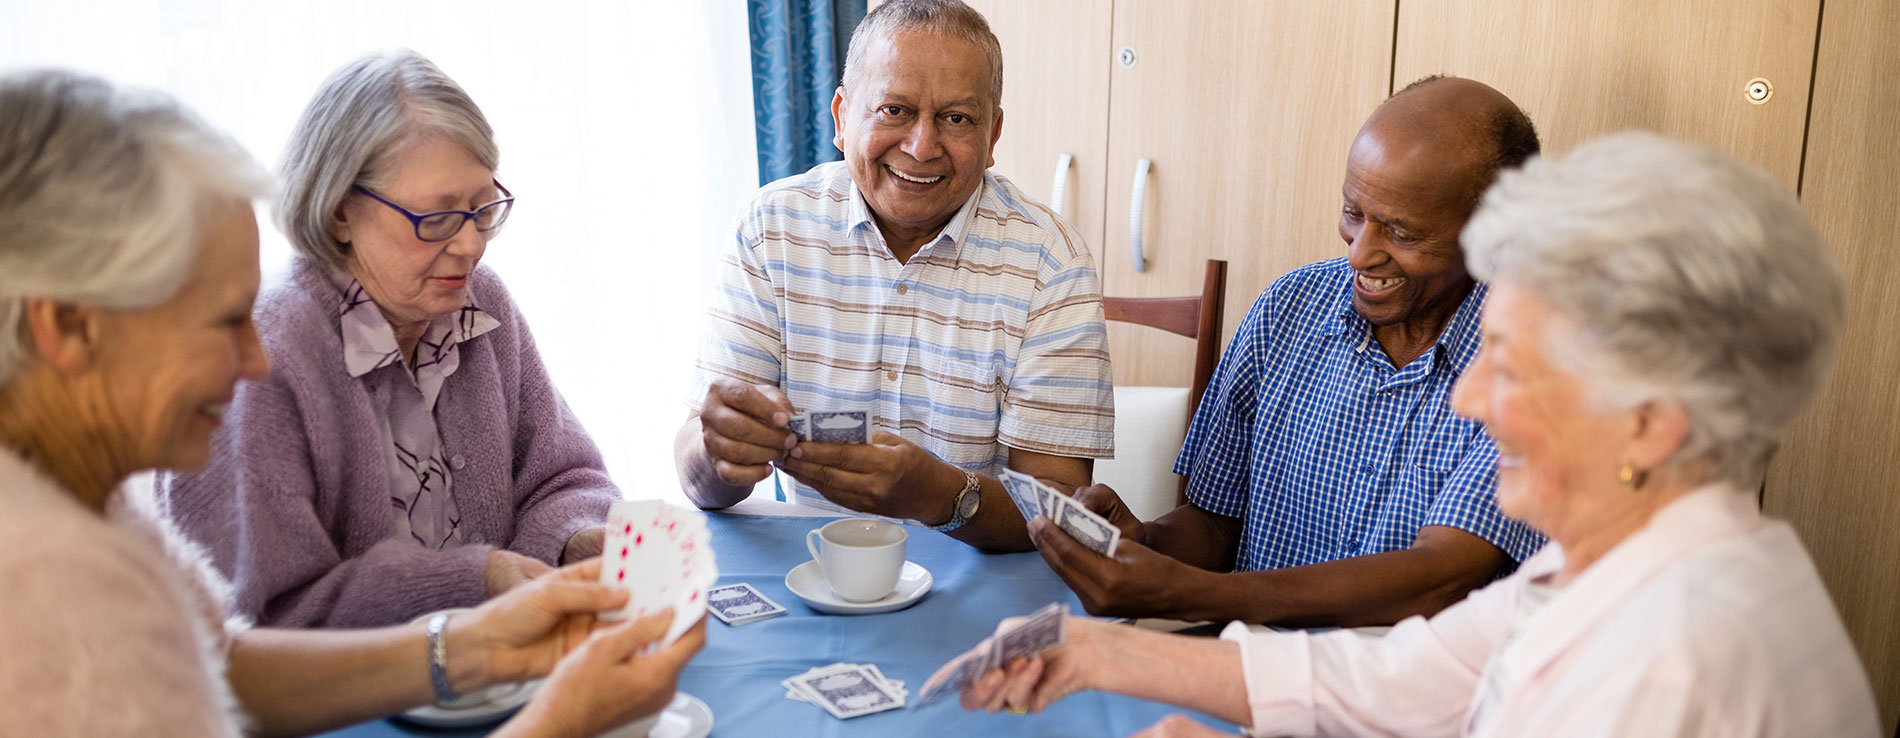 A group of senior residents sitting at a table. The table has a blue cloth covering and a cup of coffee is sitting on it. The senior residents are laughing together while playing cards.